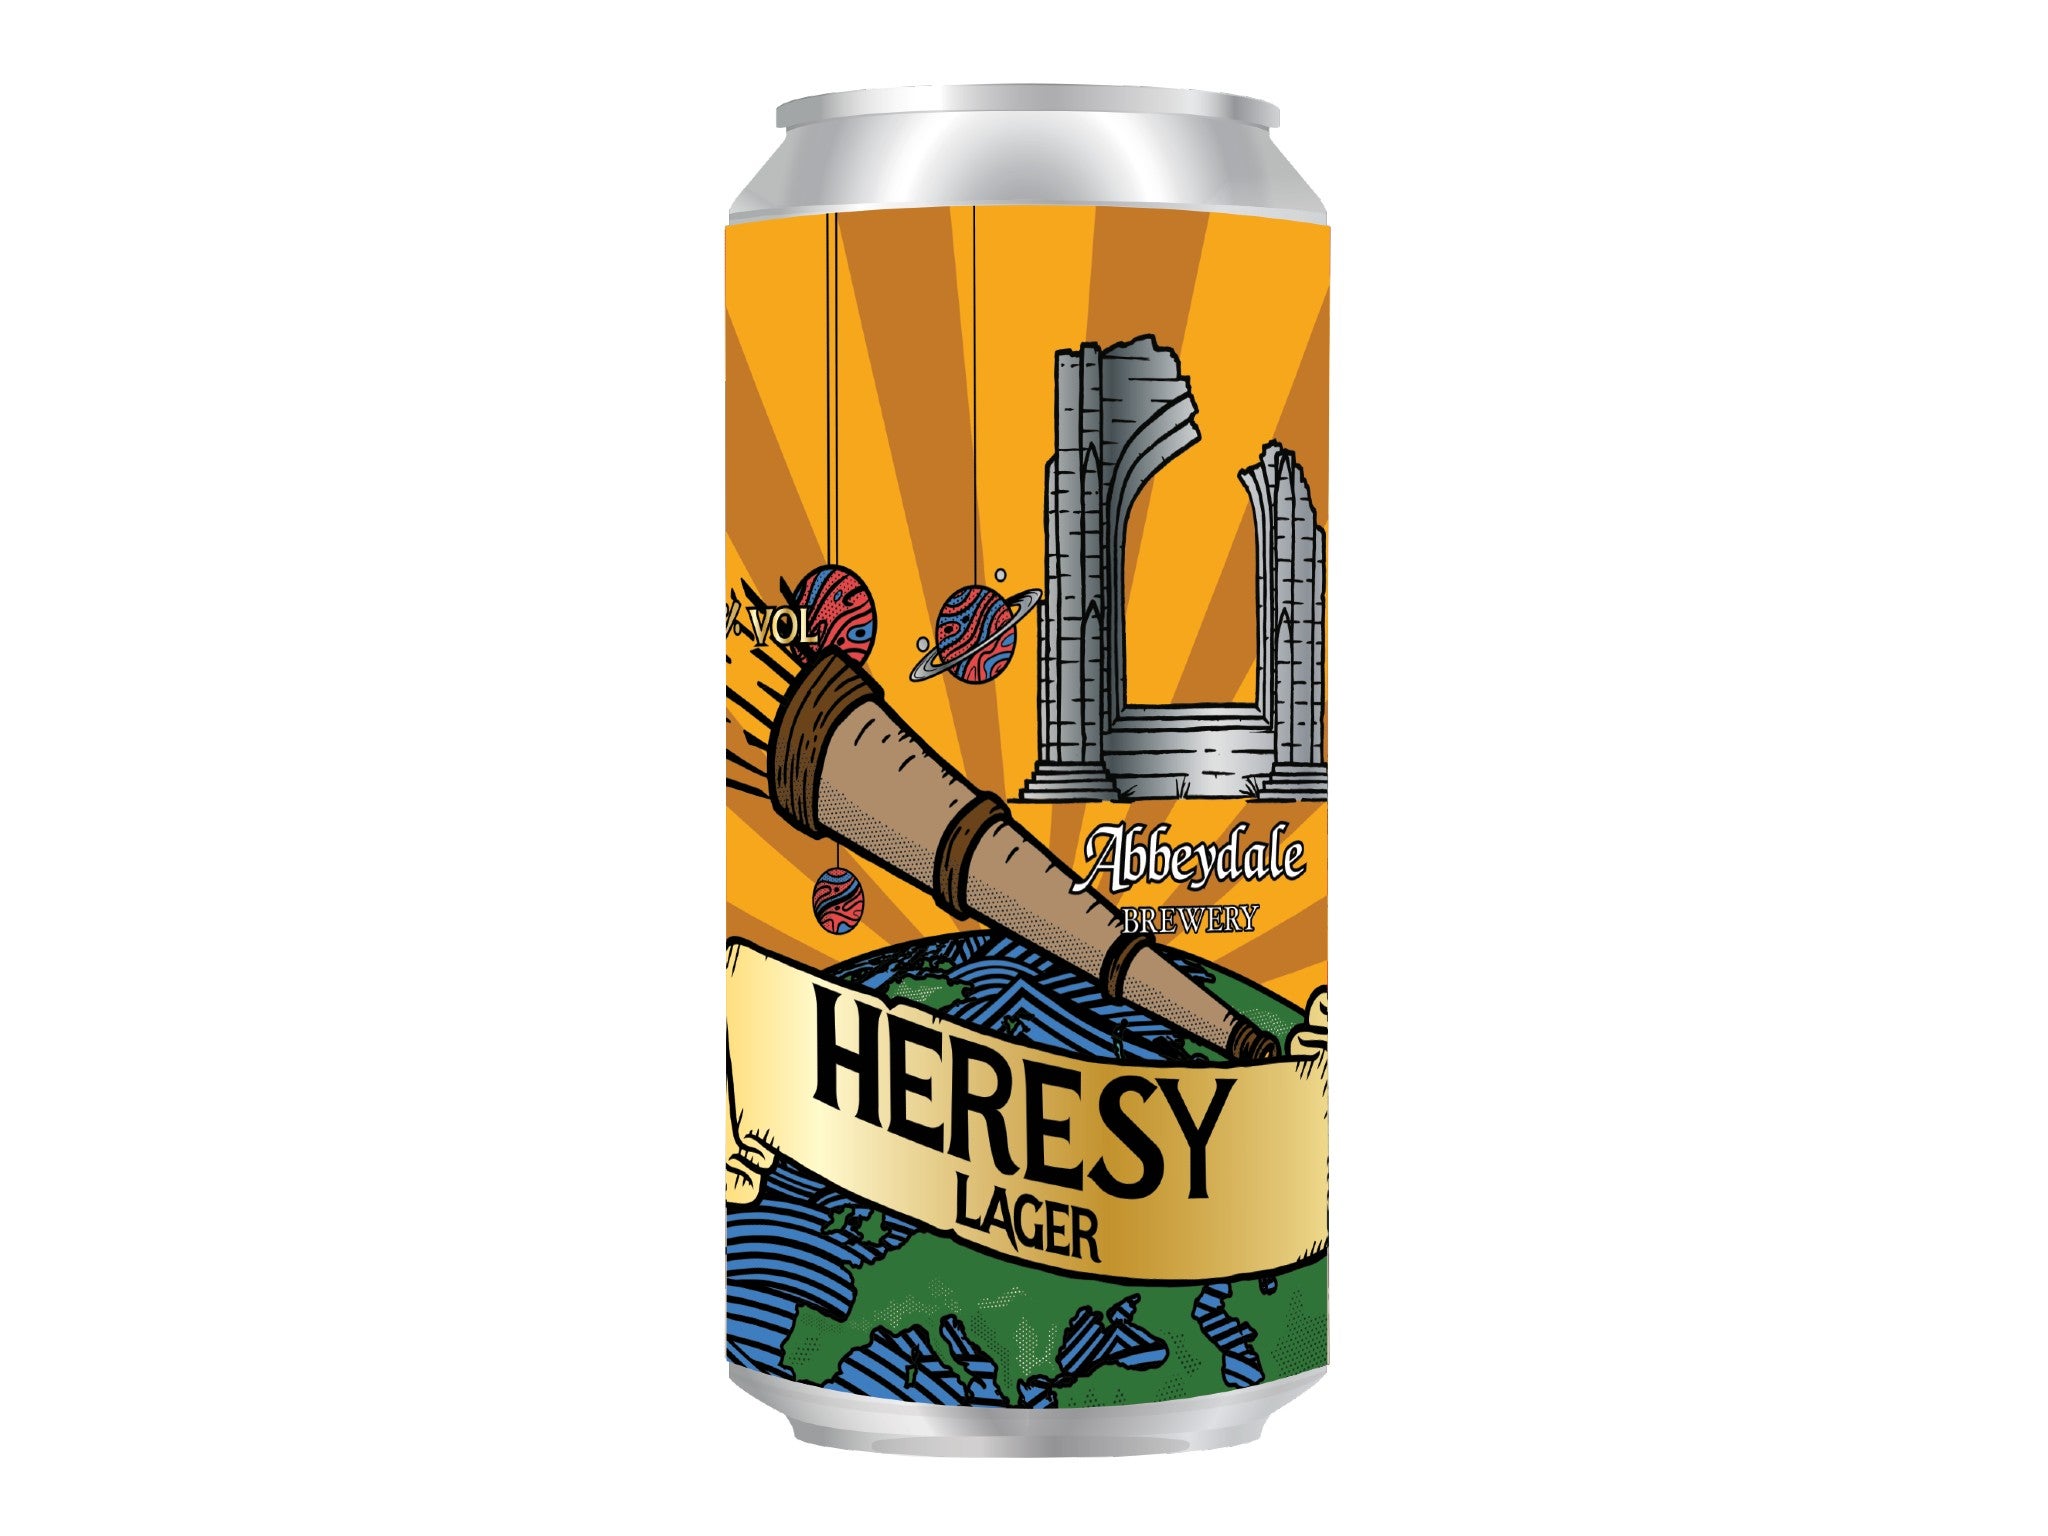 Abbeydale Brewery heresy lager, indybest.jpeg